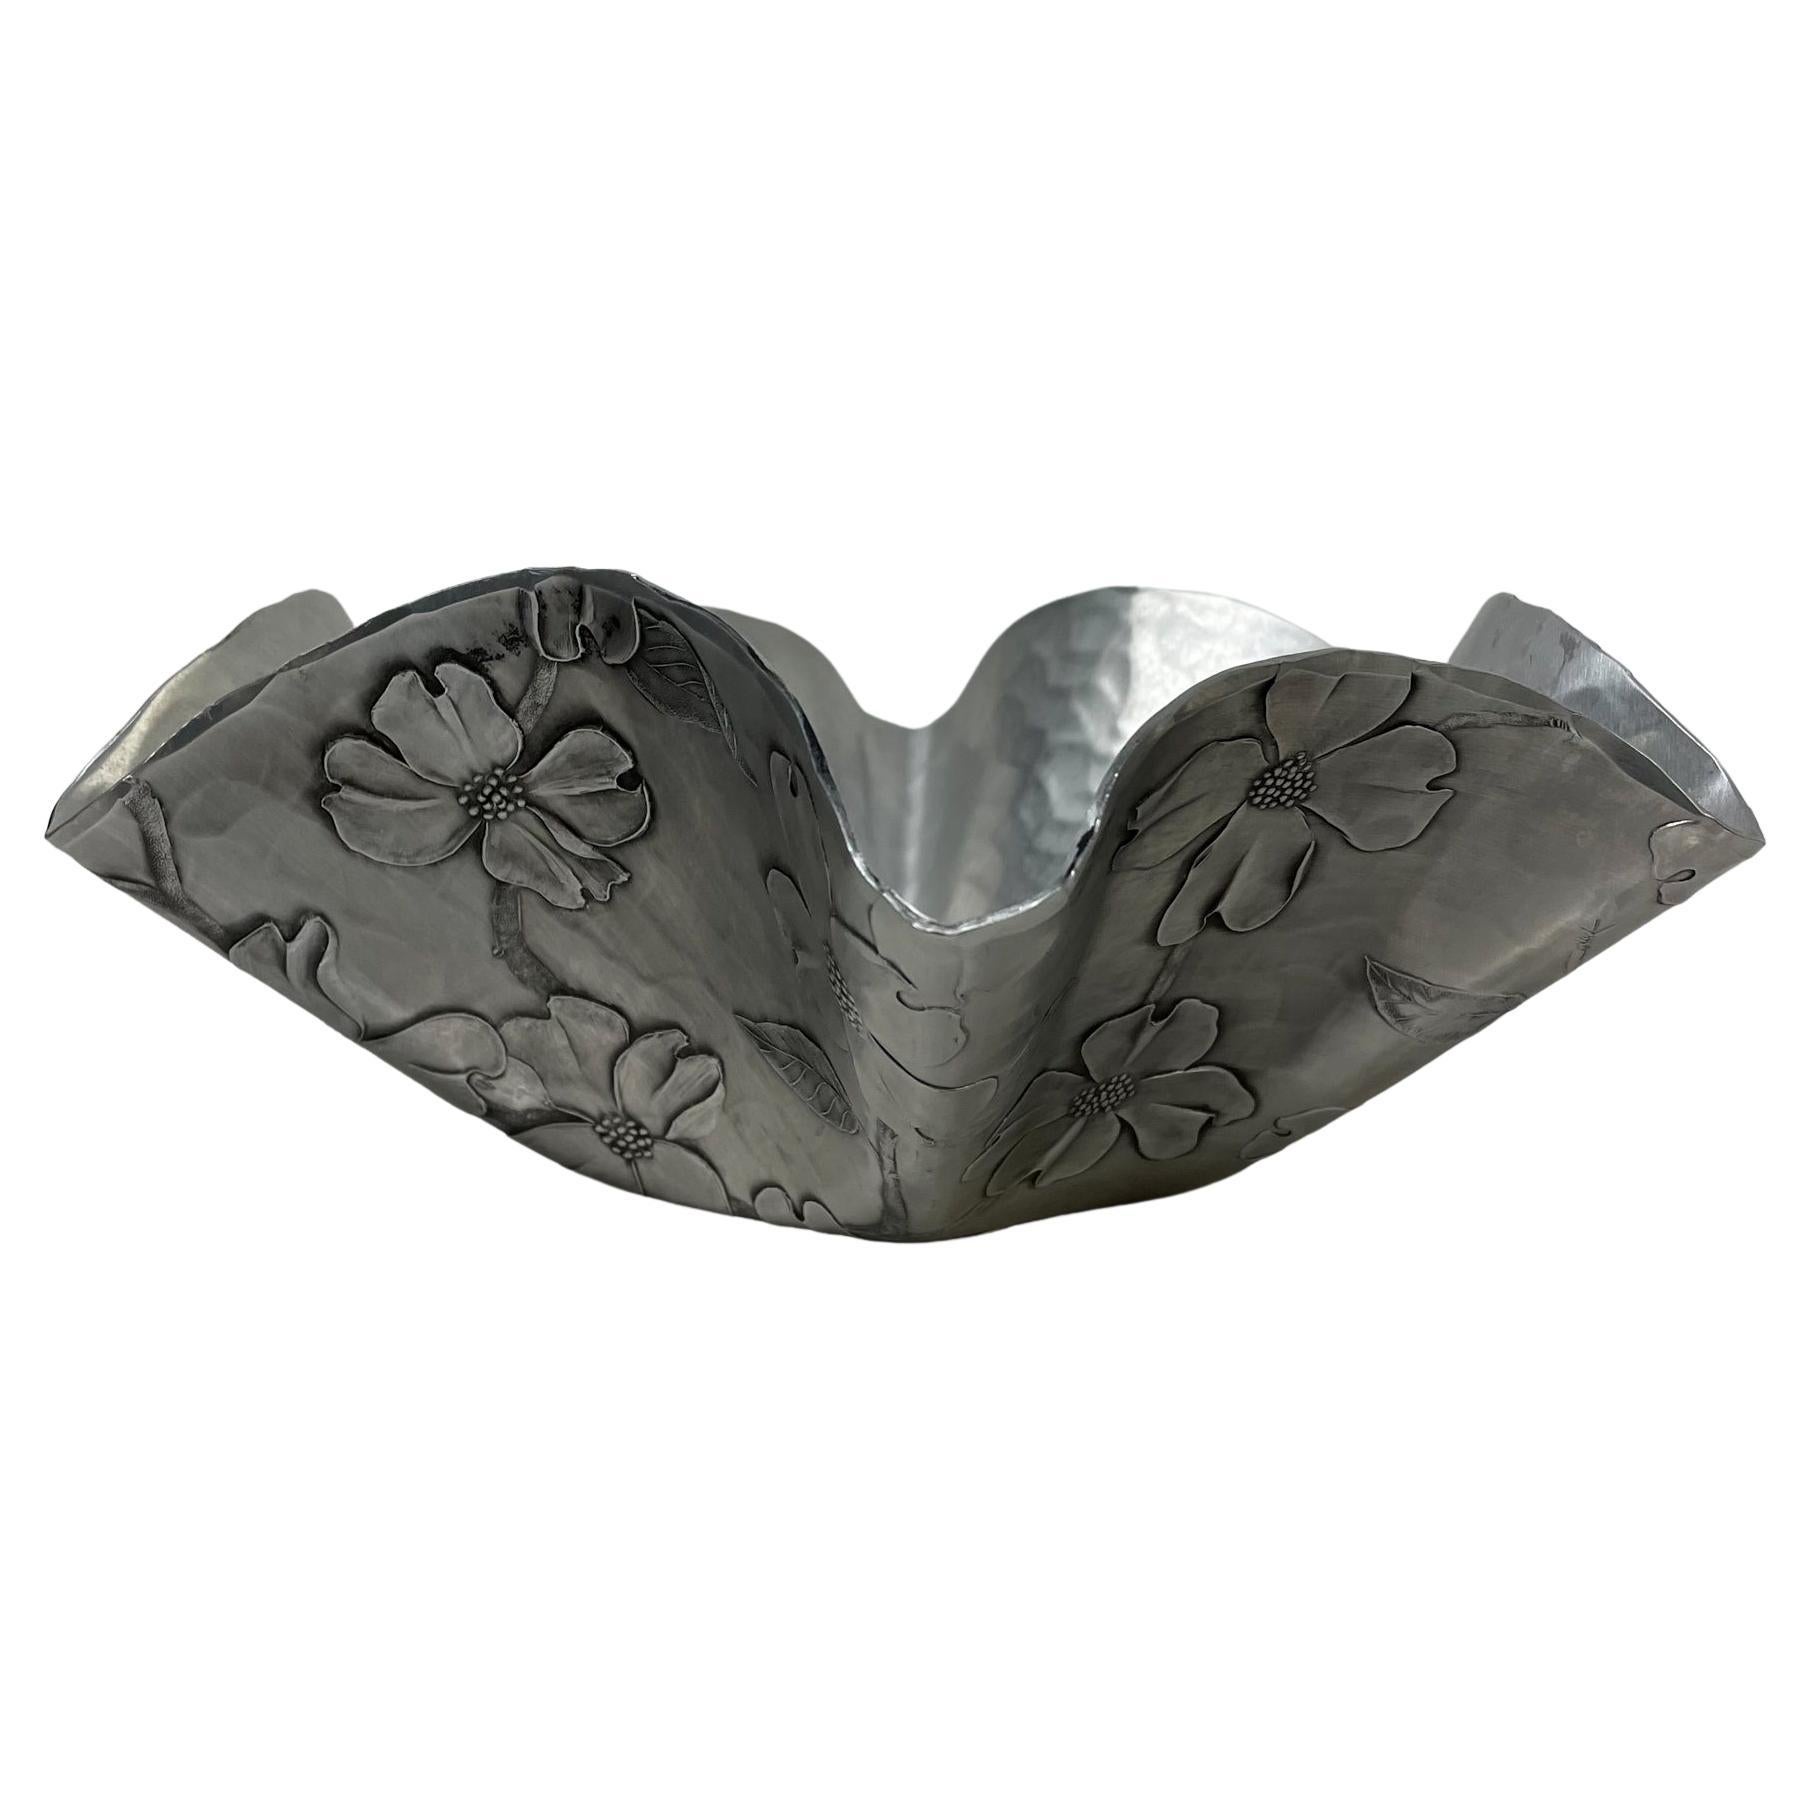 Sculptural dish
Handmade by Wendell August craftsmen in hammered aluminum collectible dish candy or catch it all.
from Grove City, Pennsylvania 
Wonderful flair with pretty dogwood floral motif.
Measures: 3.88 height x 10.5 diameter
Original